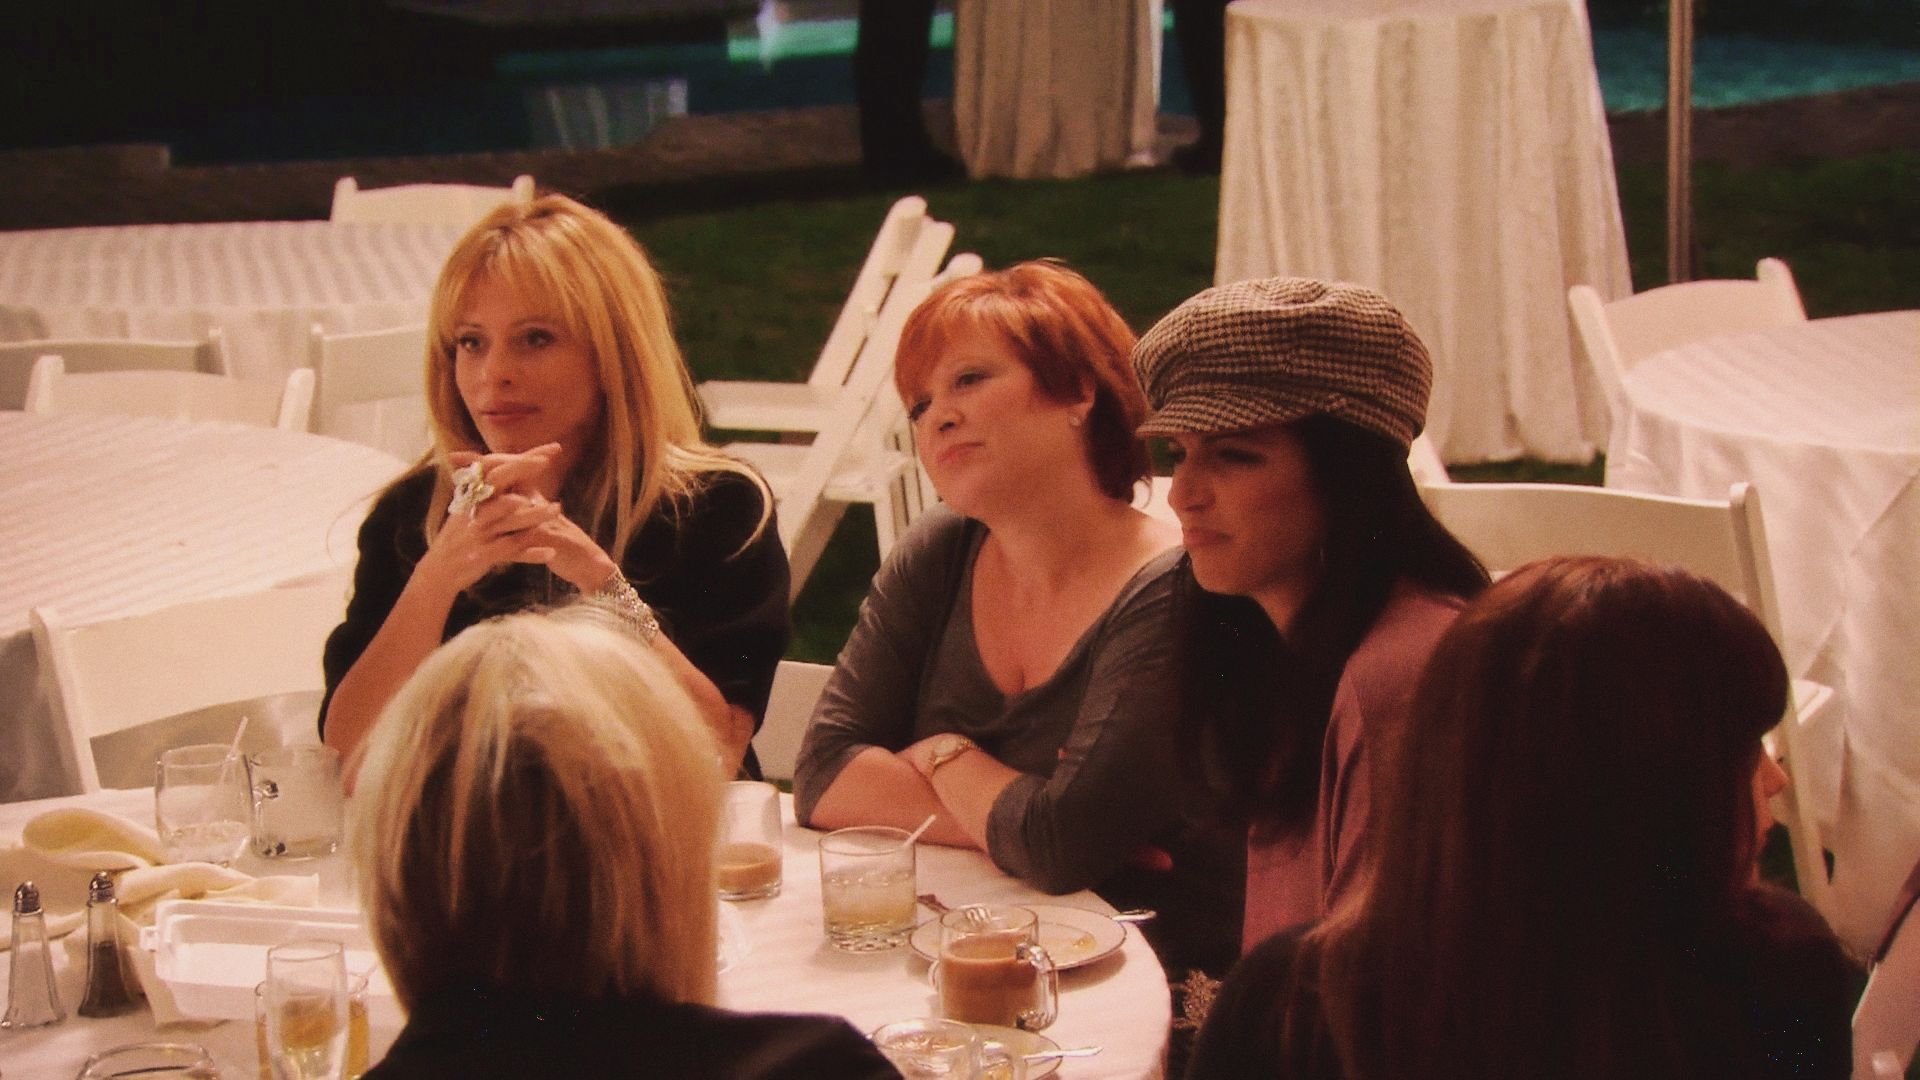 The Real Housewives of New Jersey S02E01 saison 2 épisode 1 Water Under the Table